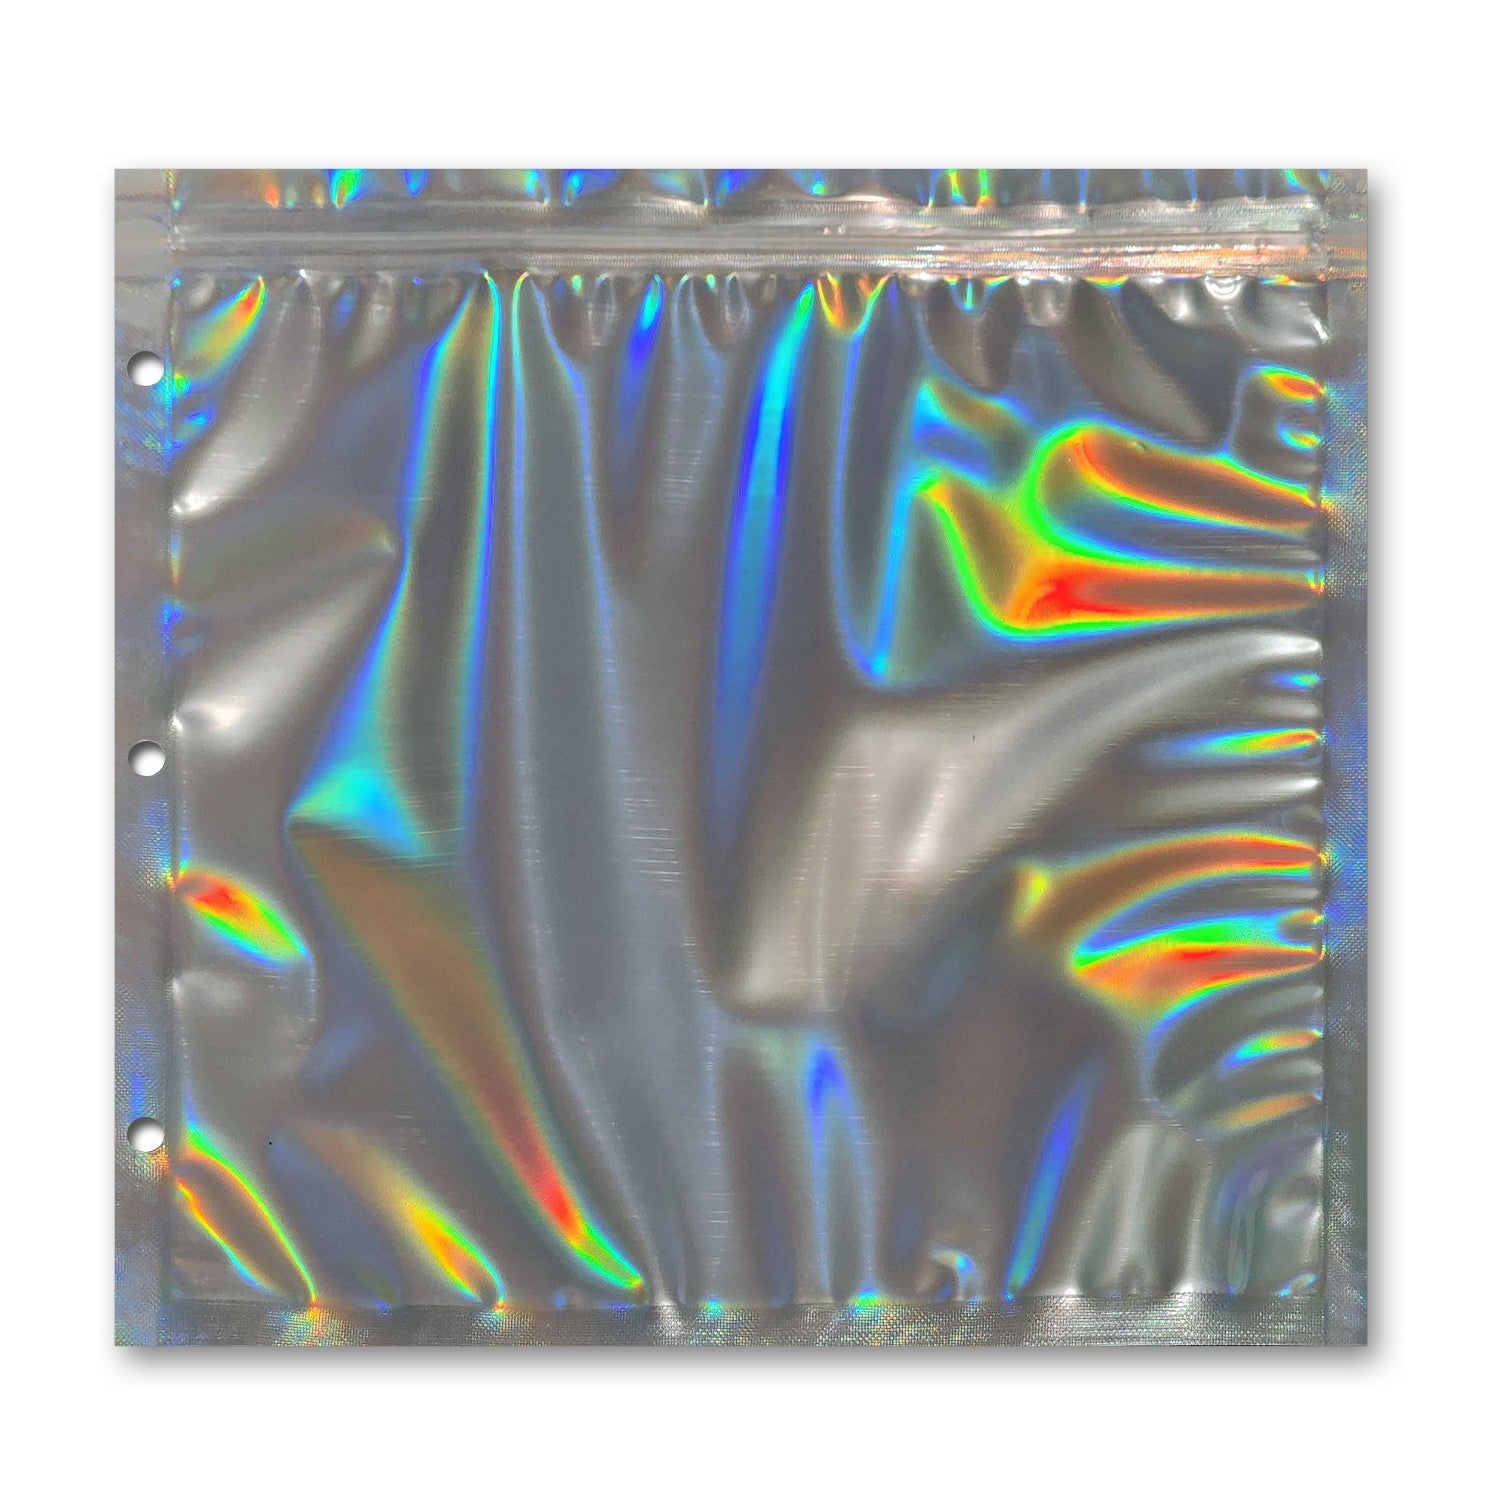 Holographic Sticker Pouches (3ct)